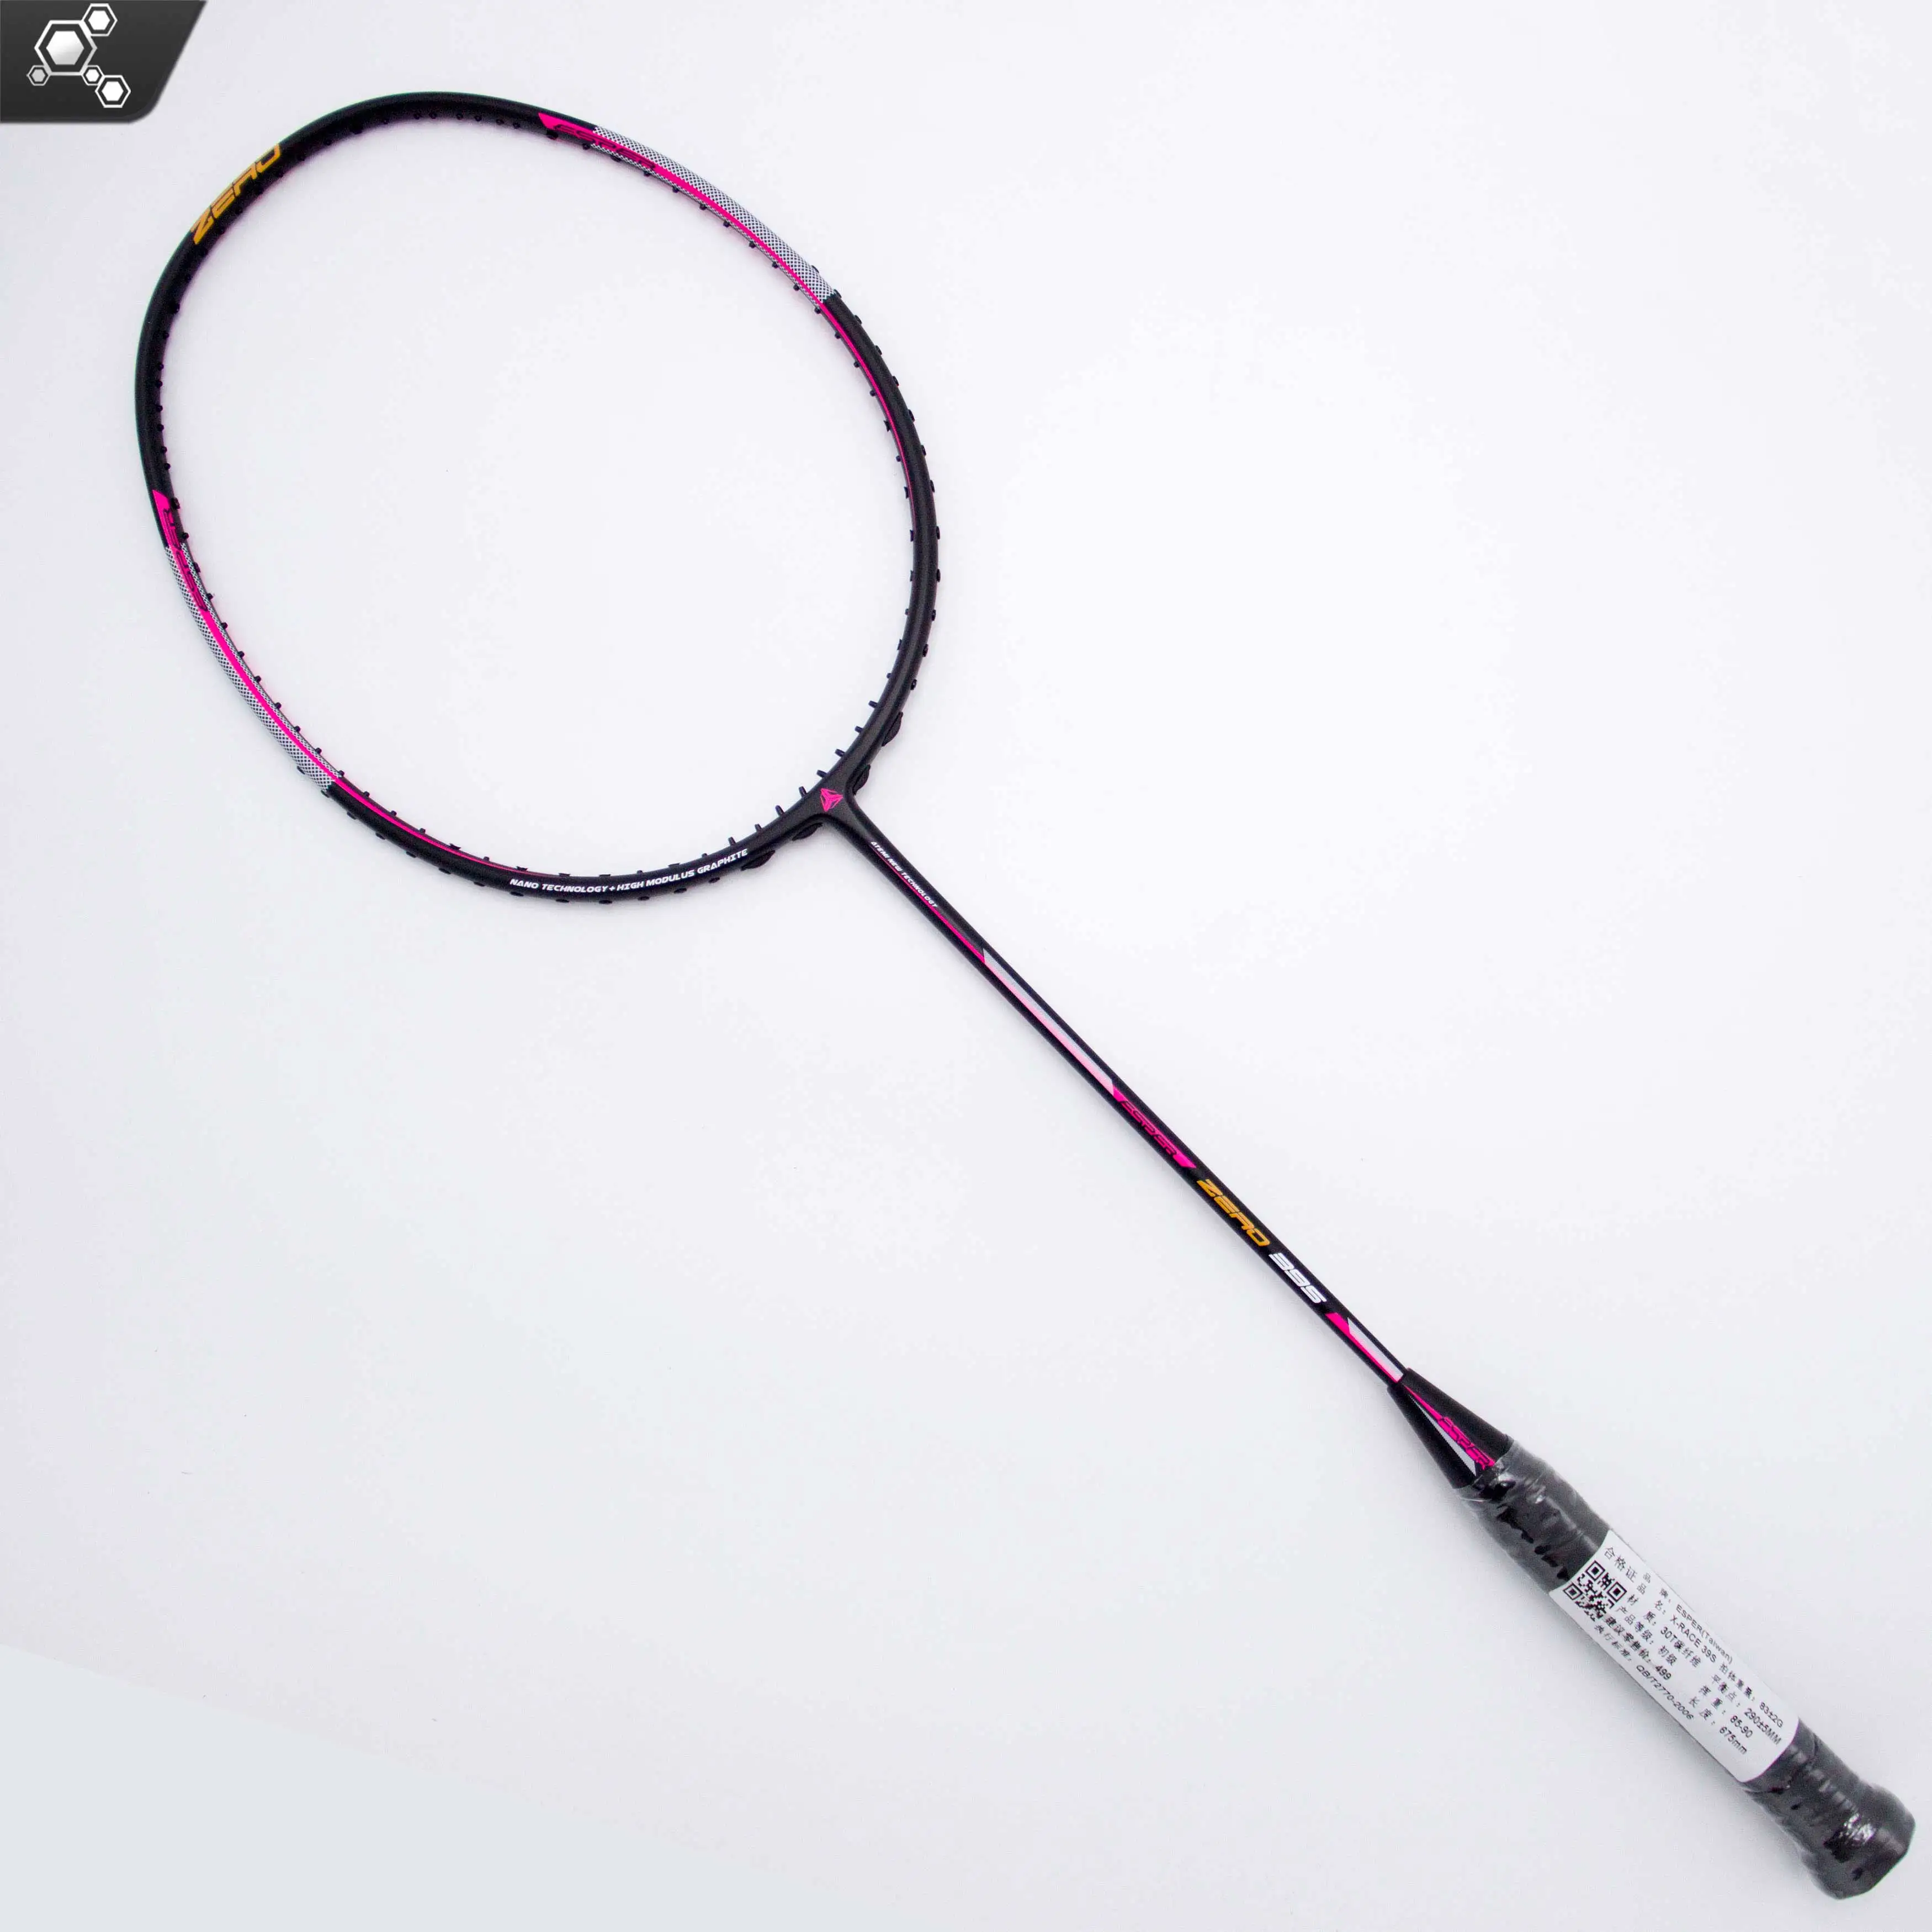 

ESPER 39S- GuangDong Province Manufacture with Japanese Toray Graphite Carbon Fiber OEM ODM Customized Badminton Racket, Black and pink